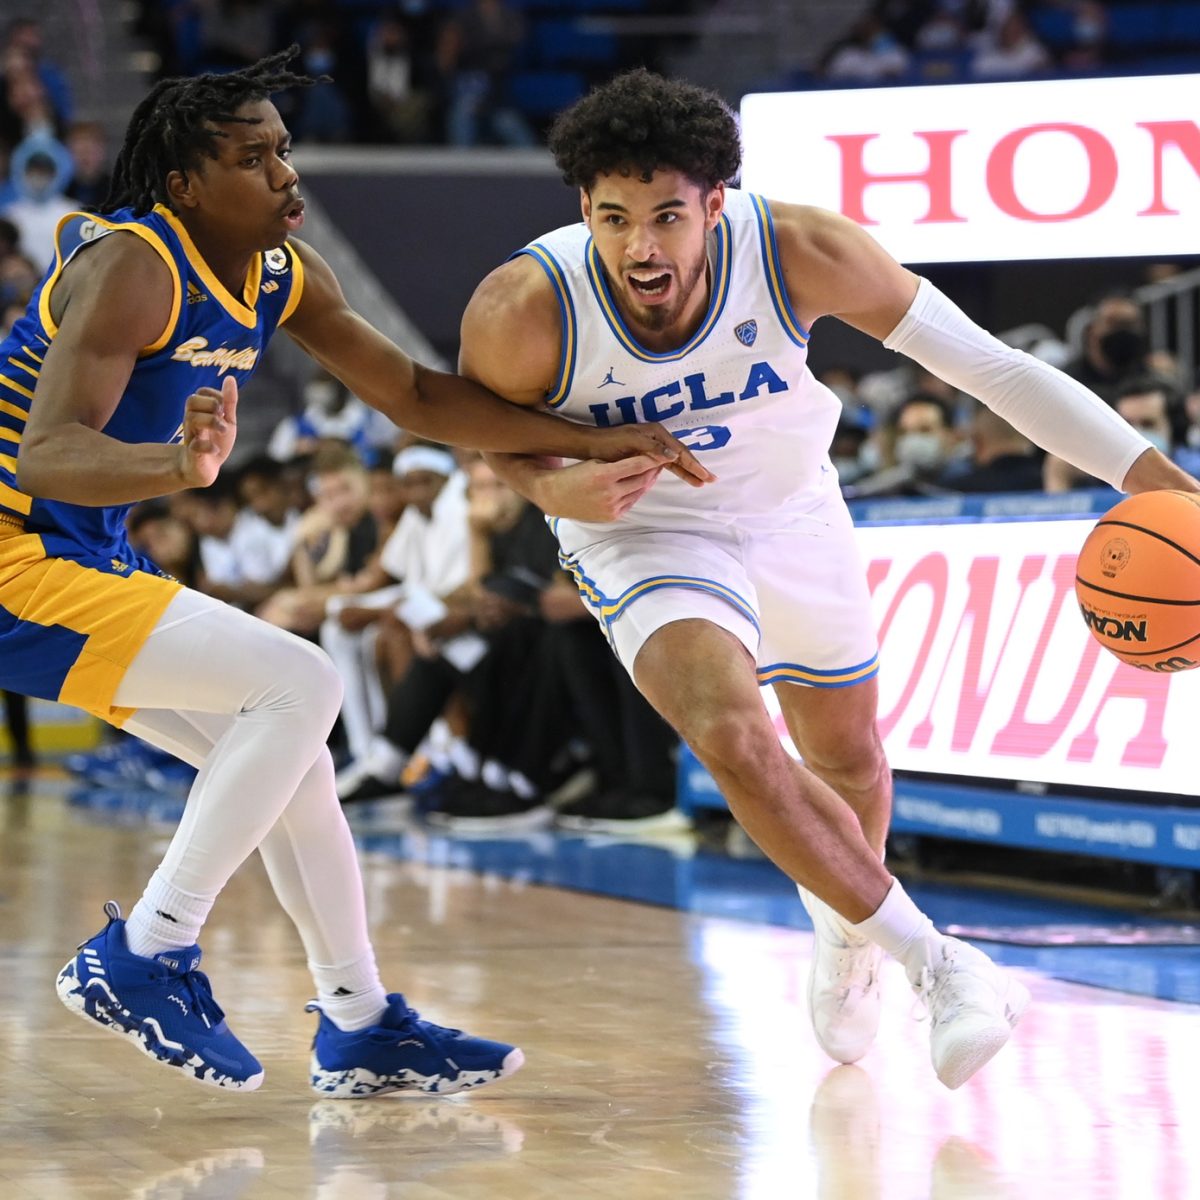 UC Riverside (UCR) vs. Cal State Bakersfield Prediction, Preview, and Odds - 1-18-2024